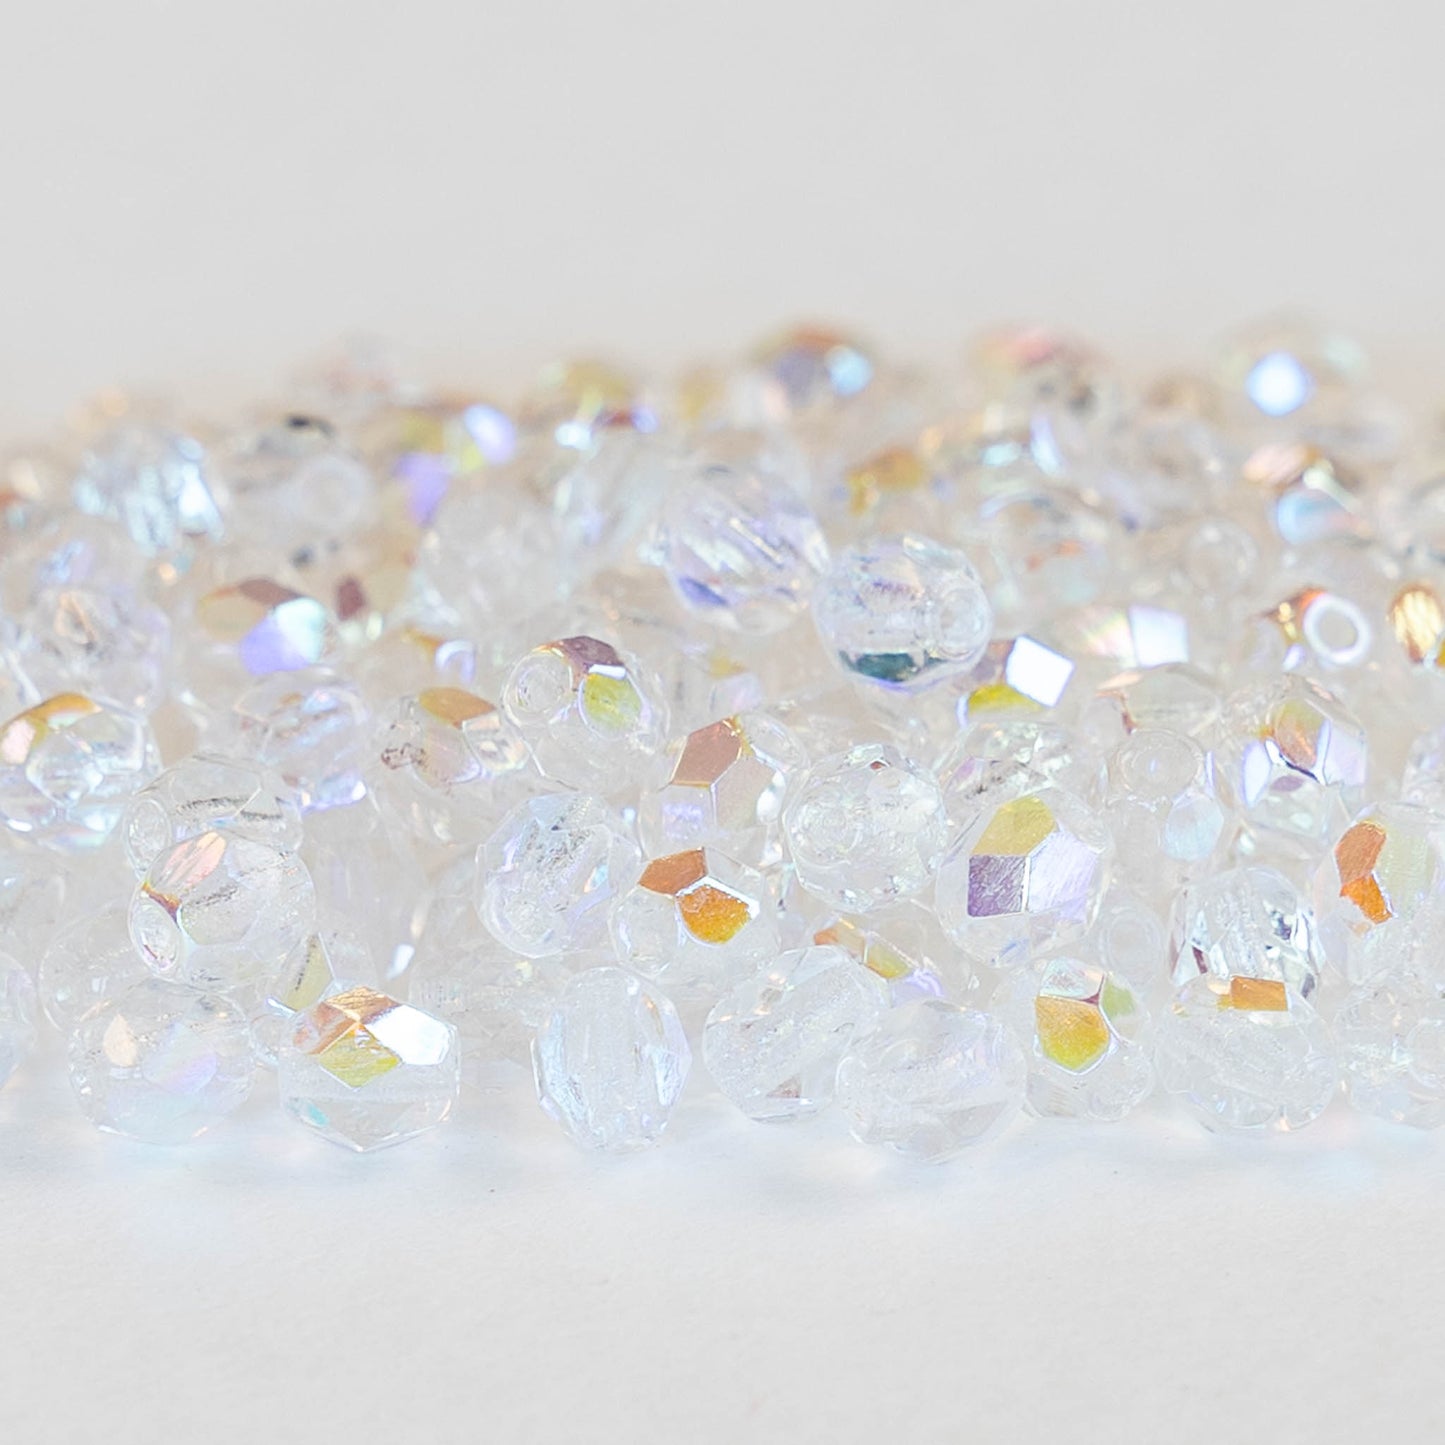 Load image into Gallery viewer, 4mm Round Firepolished Beads - Crystal AB - 100 Beads
